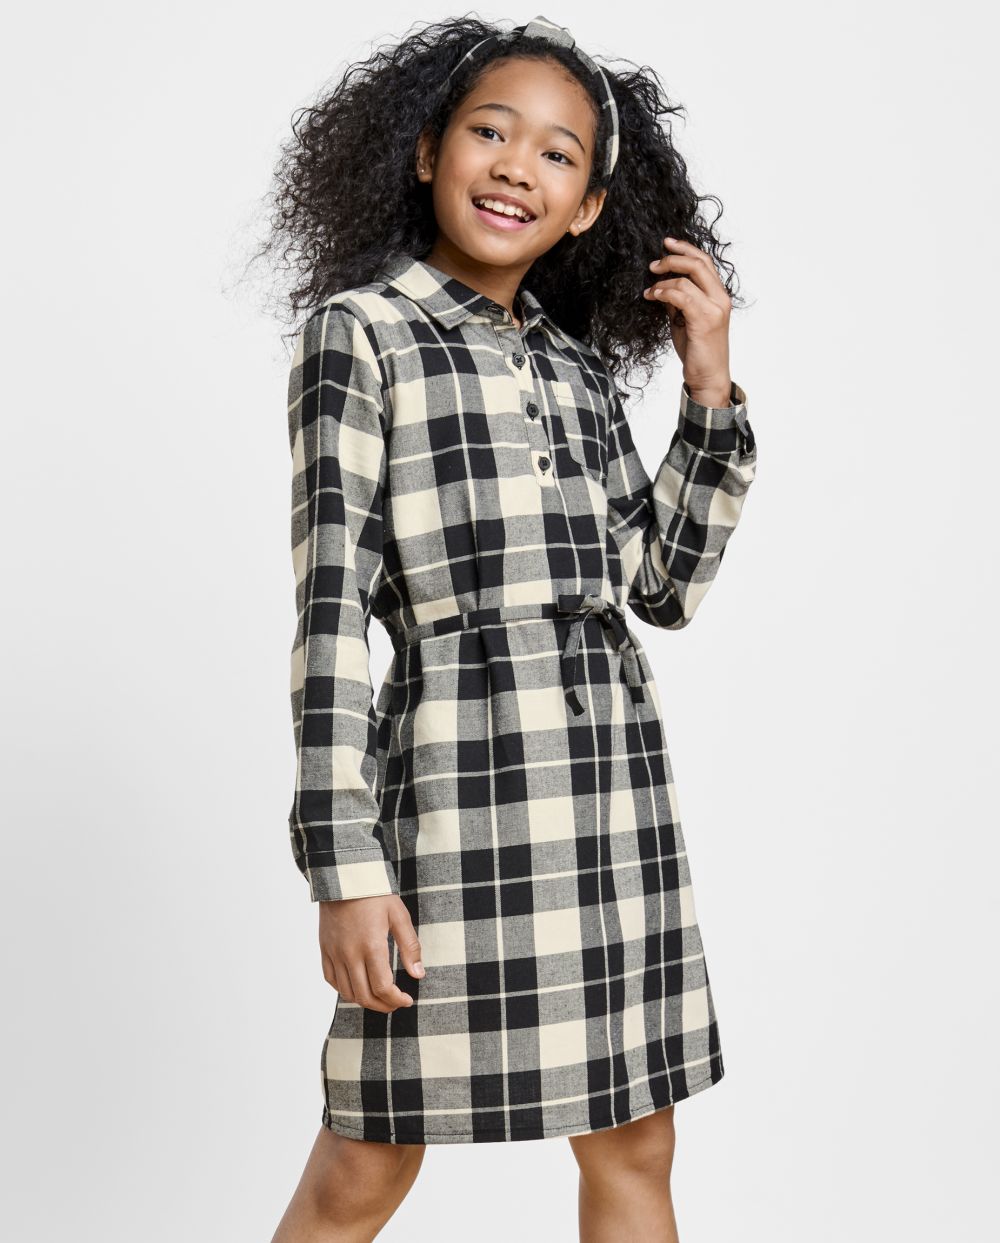 Girls Tie Waist Waistline Belted Self Tie Pocketed Plaid Print Collared Above the Knee Long Sleeves Shirt Dress